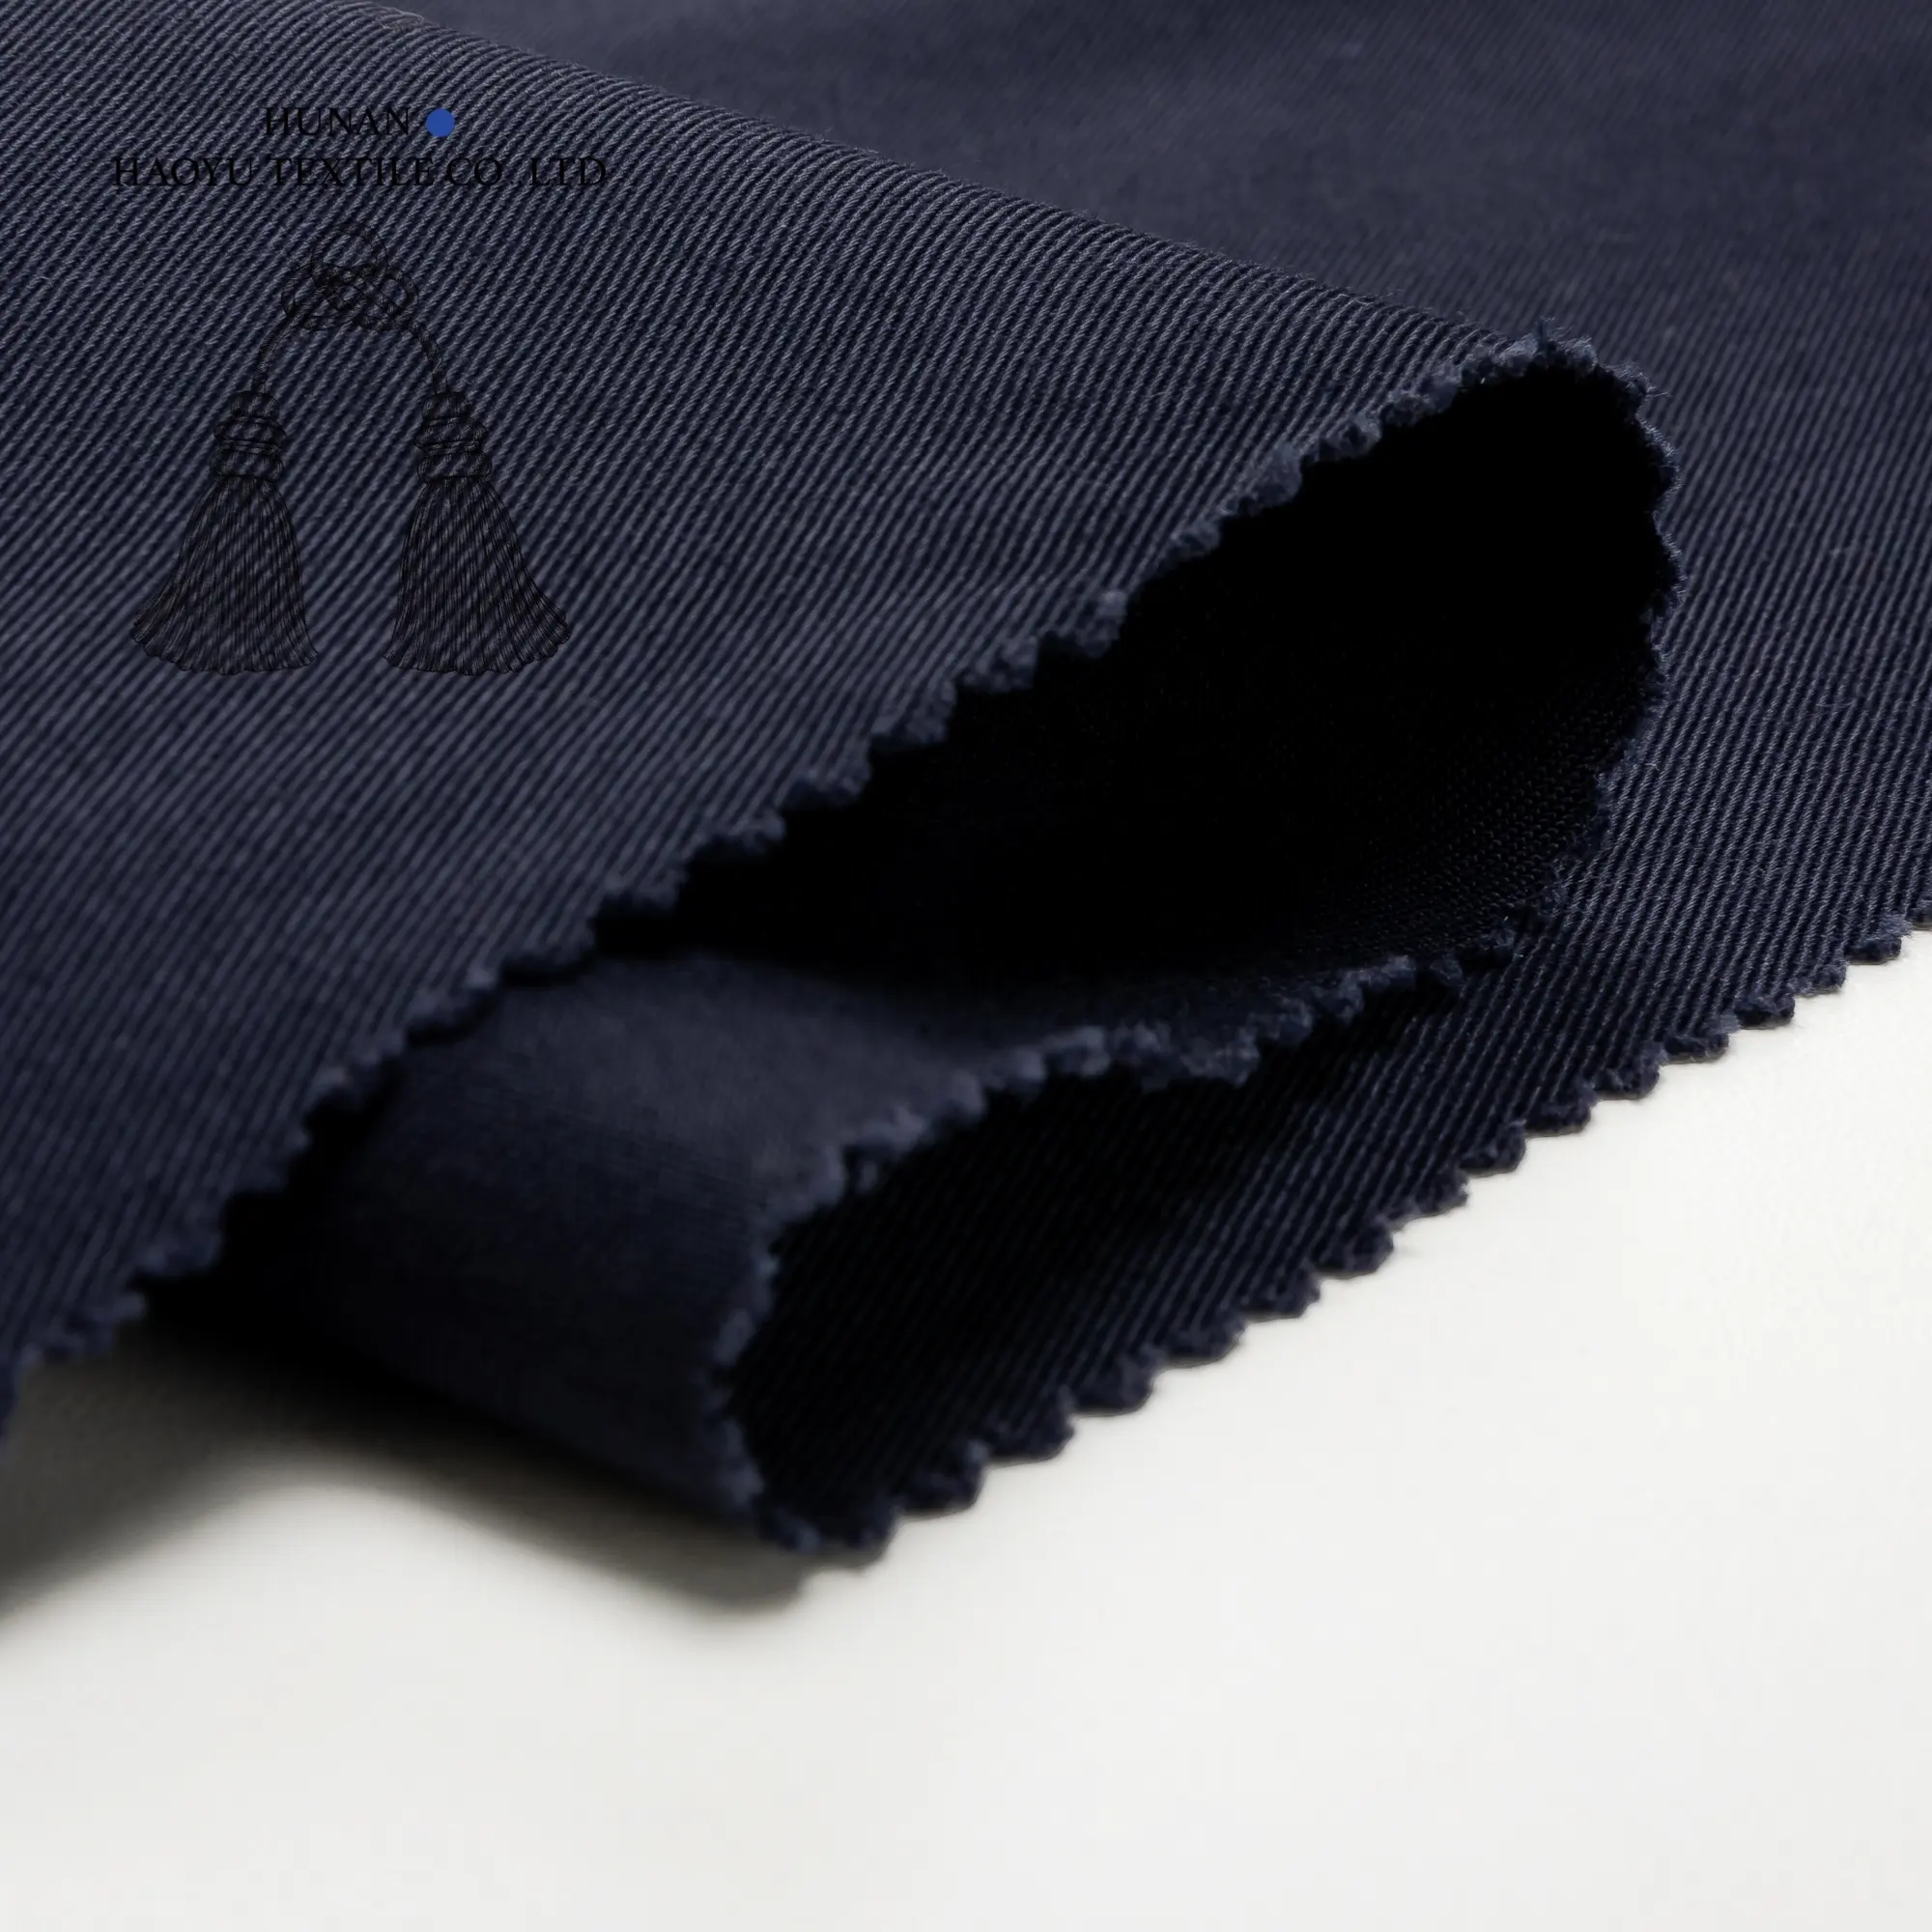 CVC 60% cotton 40% spandex 240 gsm twill Crease resistant rip-stop woven windproof fabric for workwear uniform